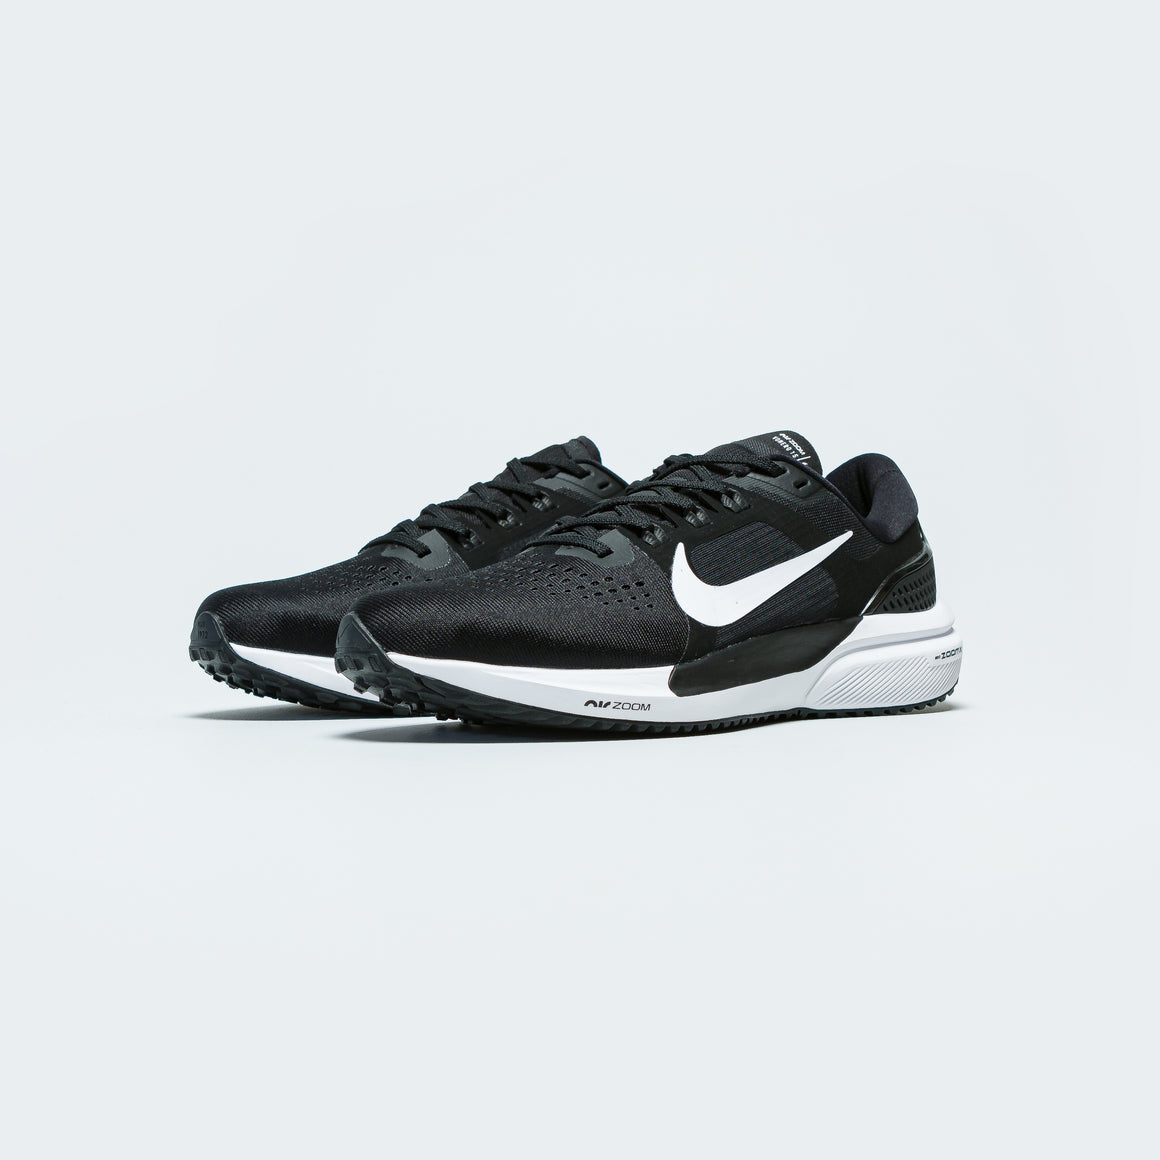 Nike - Air Zoom Vomero 15 - Black/White-Anthracite-Volt - Up There Athletics